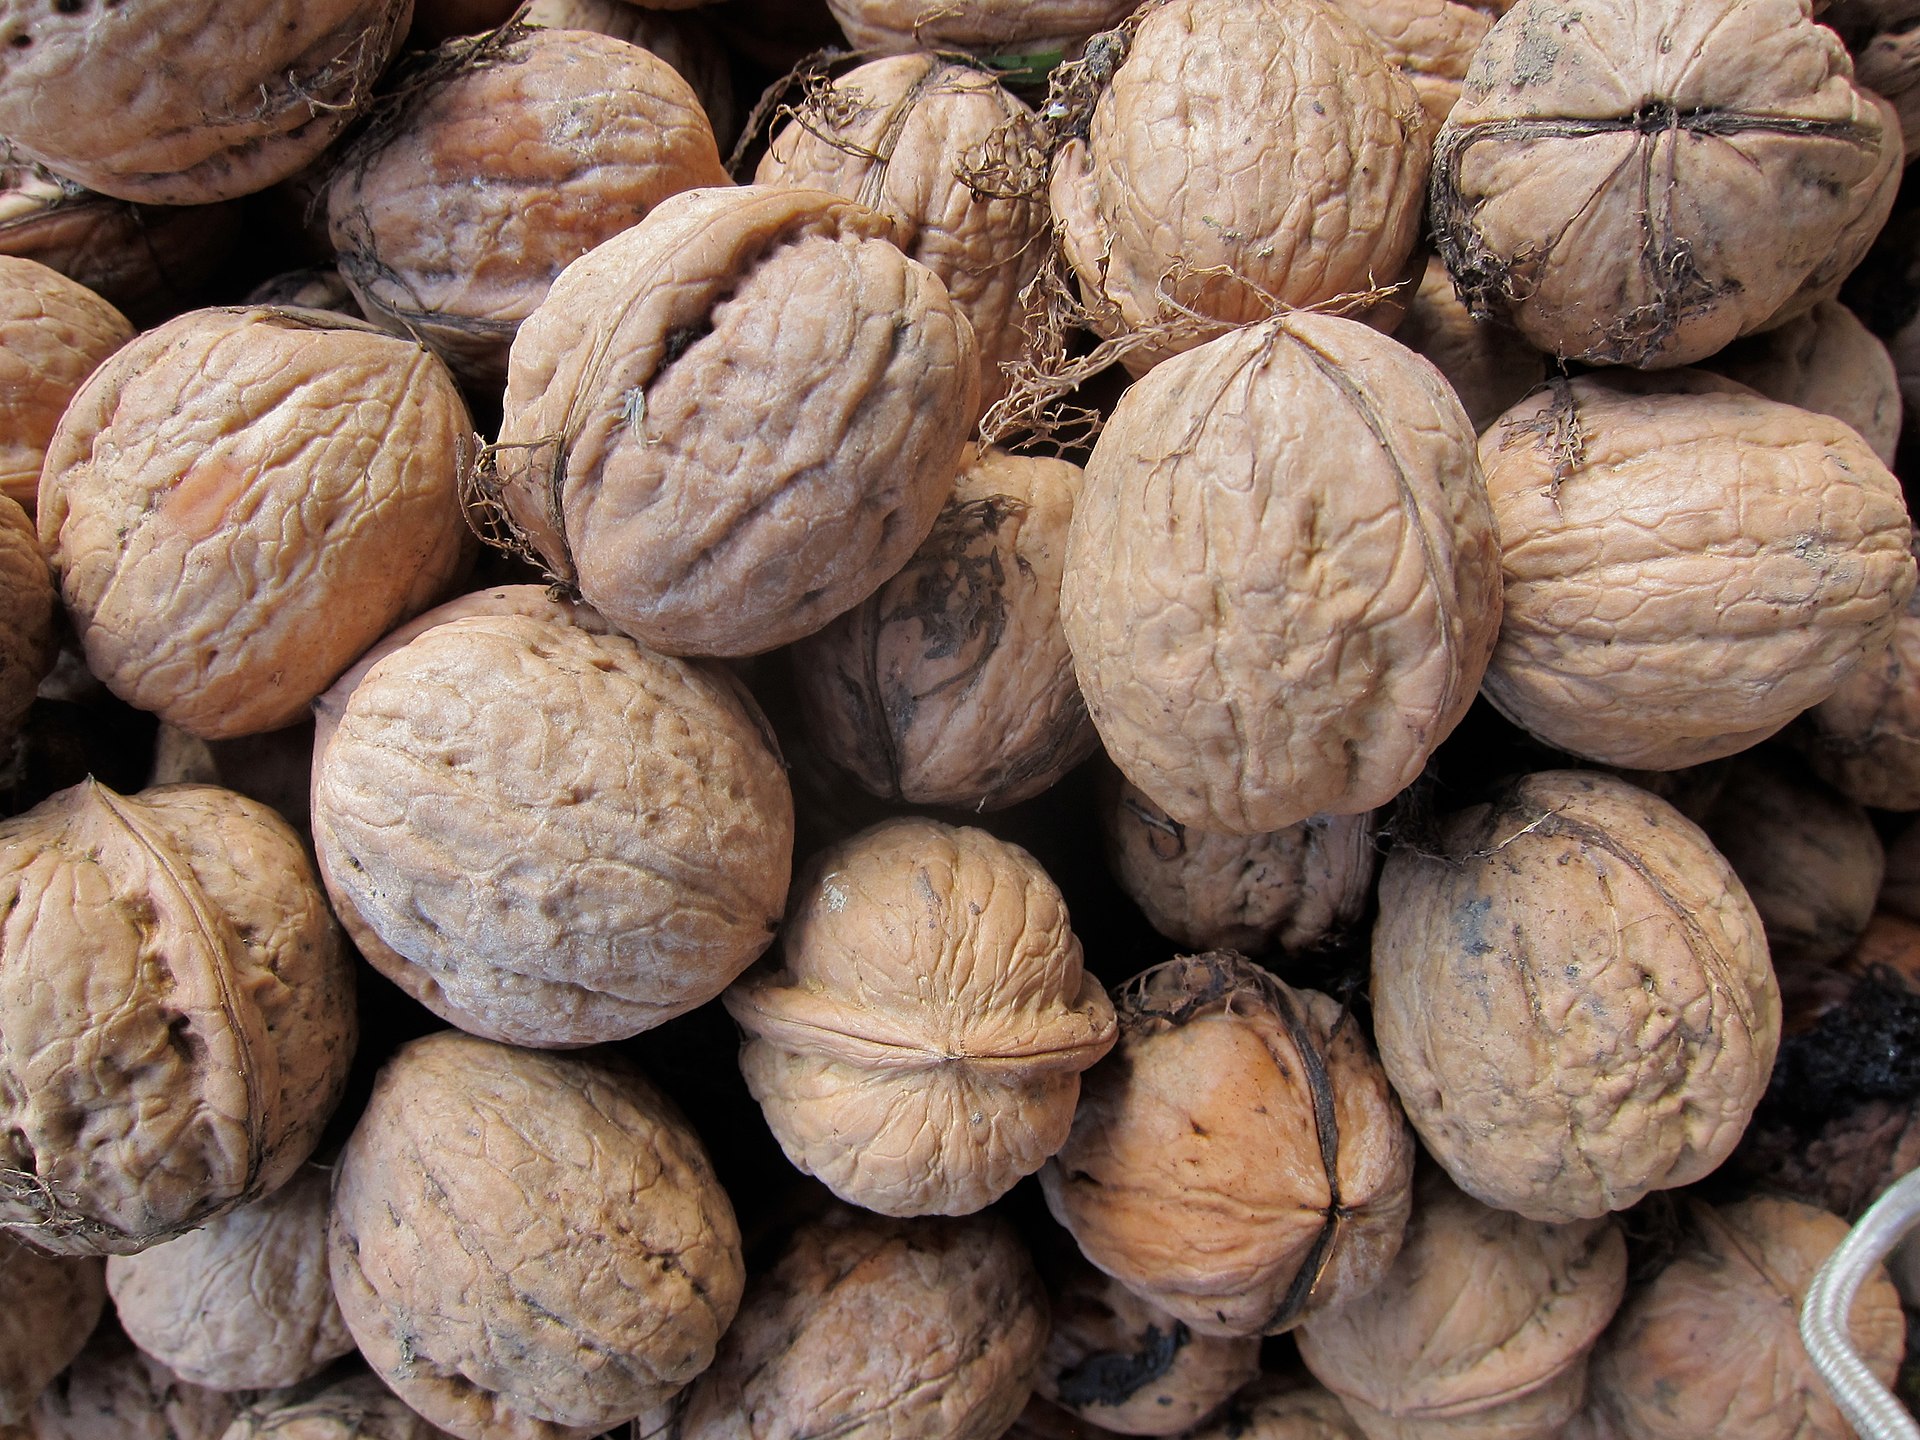 Previous research that prompted this microbial research showed that the amount of energy (calories) derived from walnuts after we eat them is less than previously though